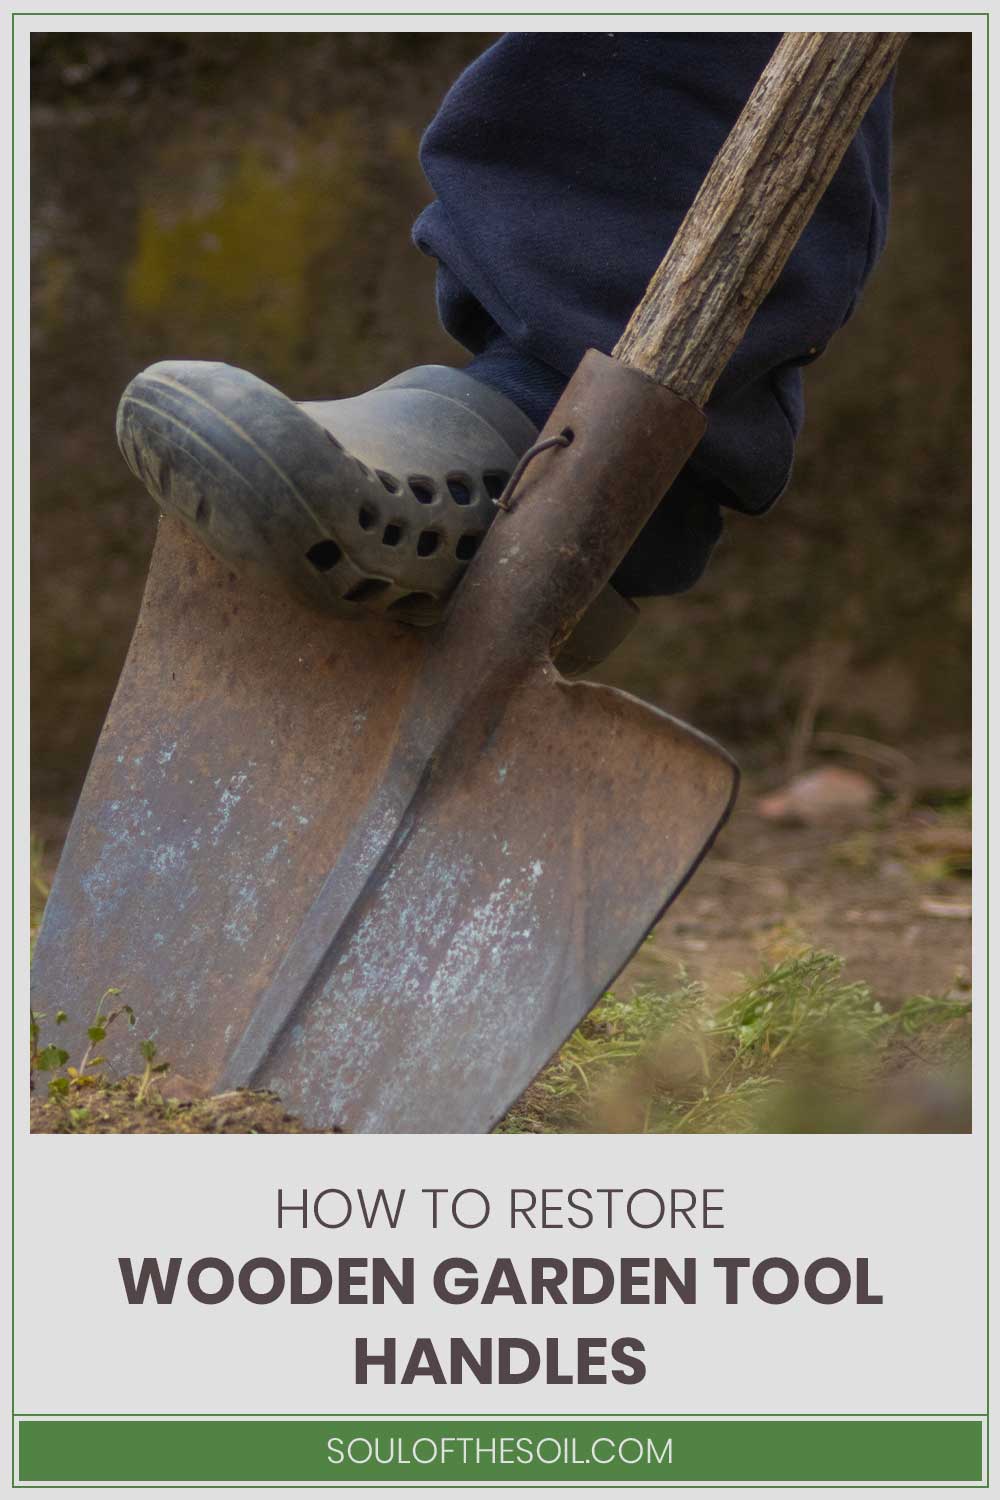 Persons foot pressing a shovel into the ground - How To Restore Wooden Garden Tool Handles?